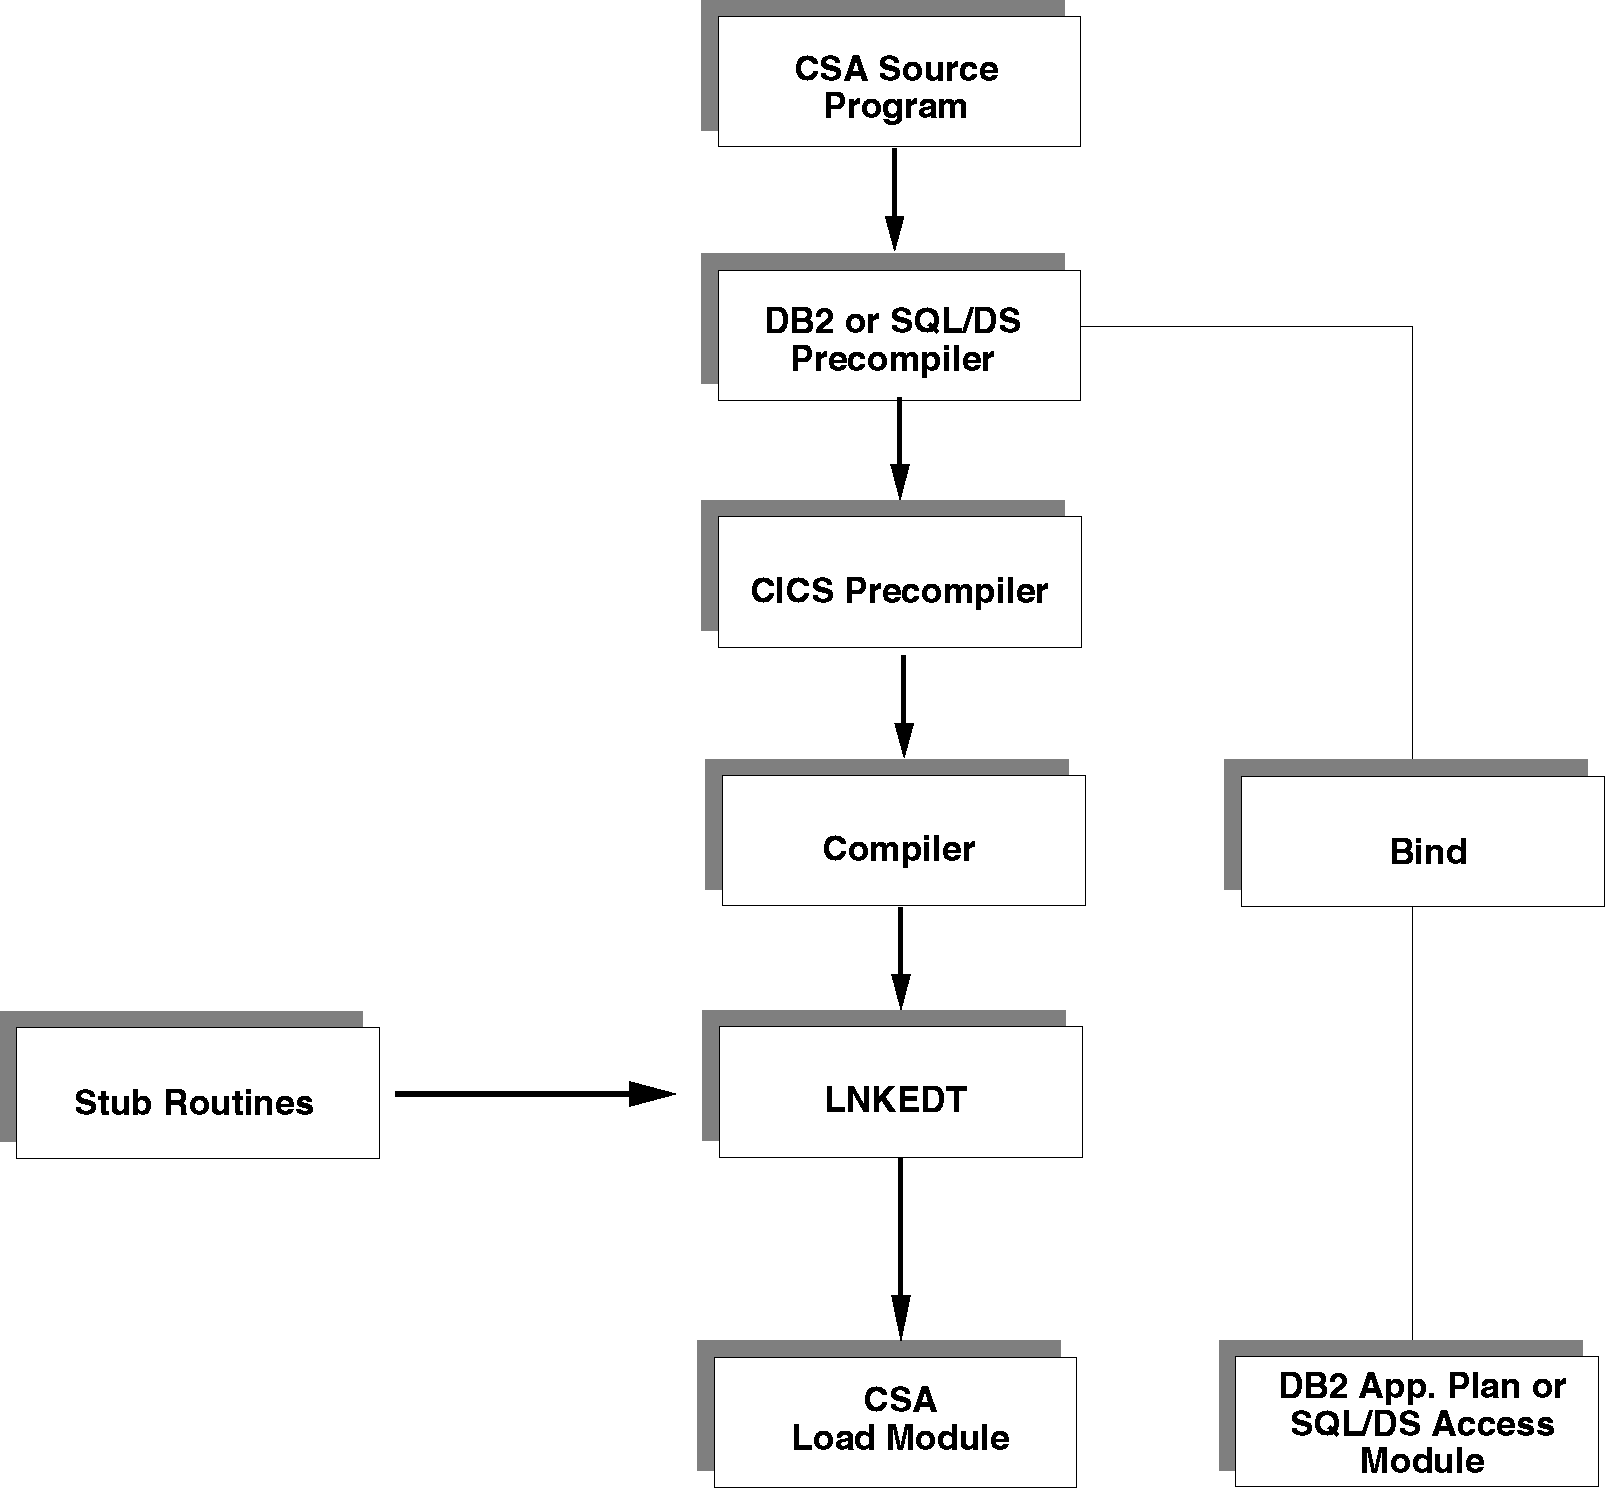 The figure shows how to access CSA with database access. 